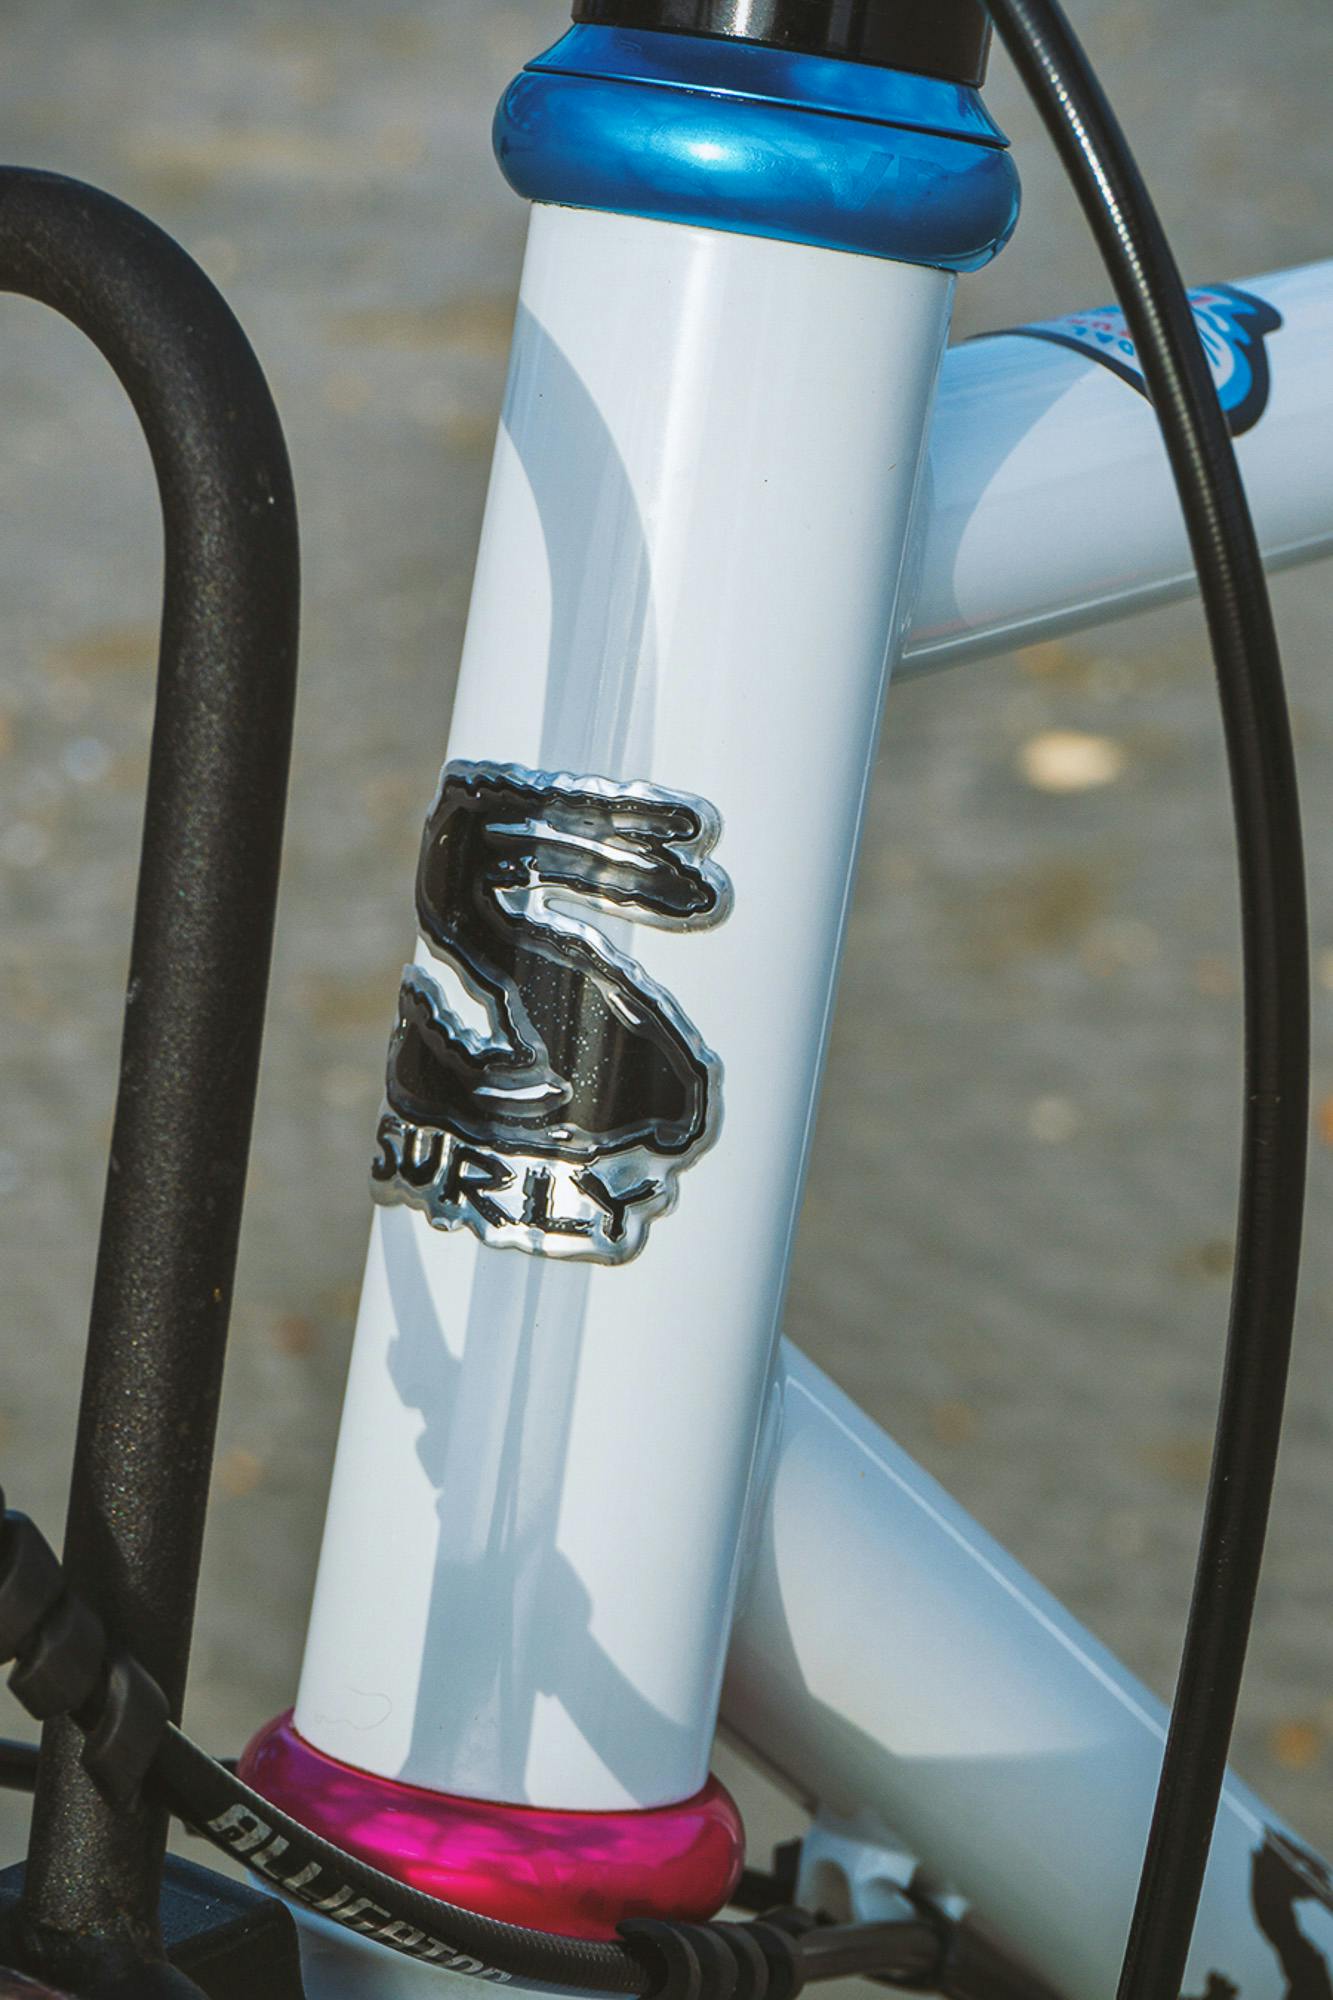 A Surly head tube badge.